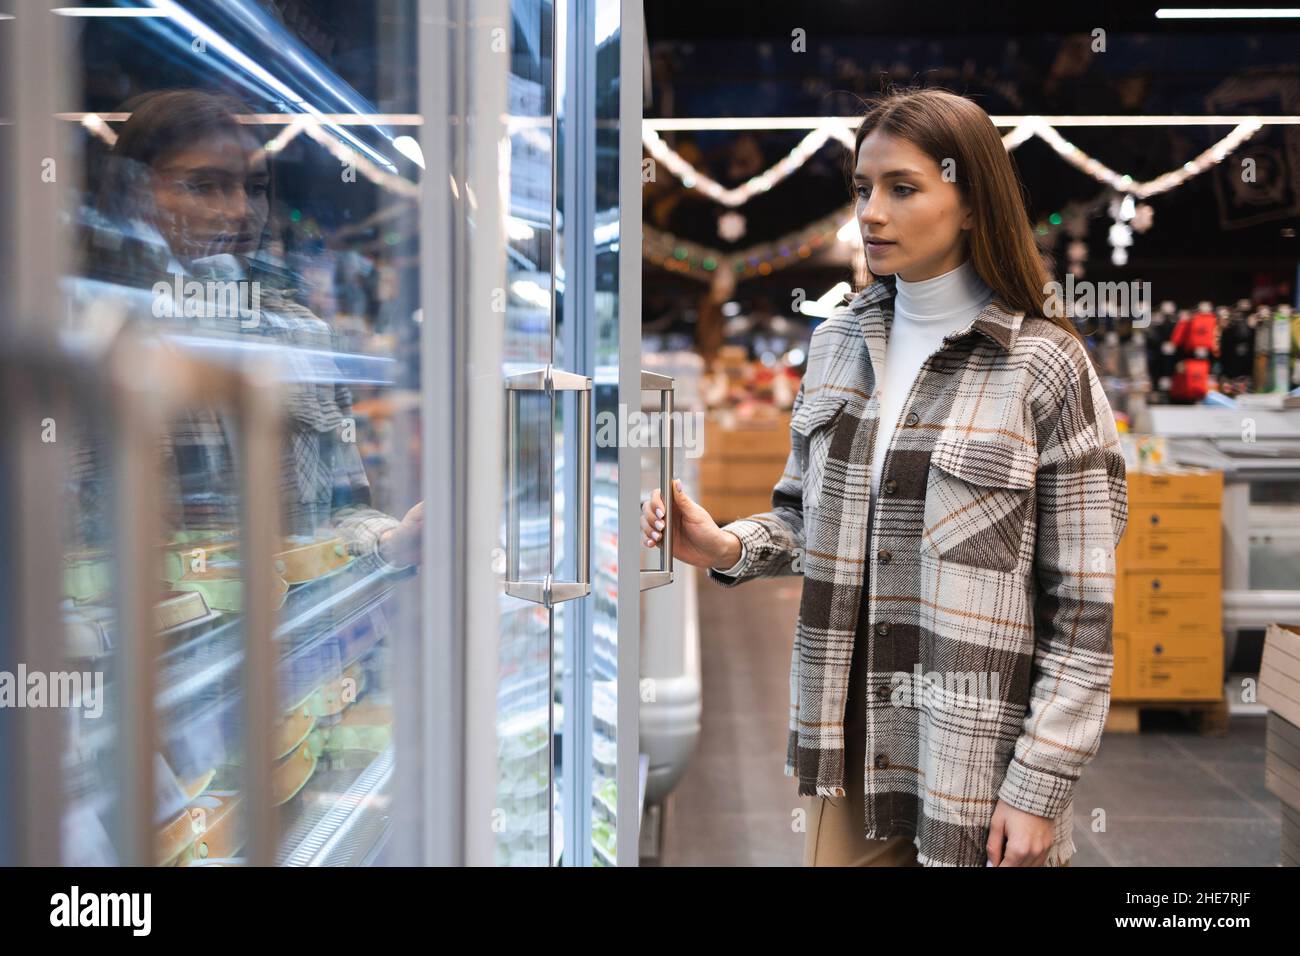 Woman opens the refrigerator door with a product in a supermarket. Girl chooses eggs in the grocery store Stock Photo